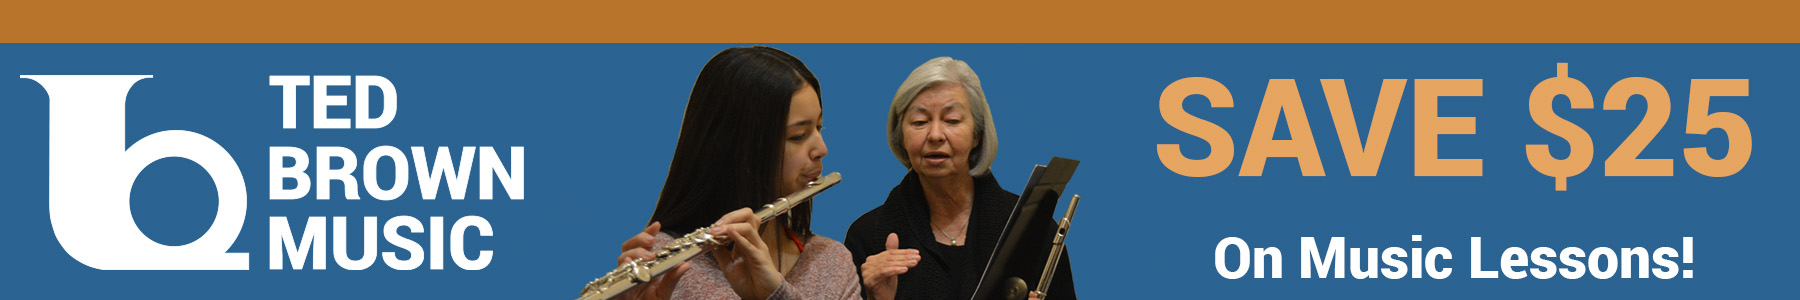 Ted Brown Music Lessons Banner